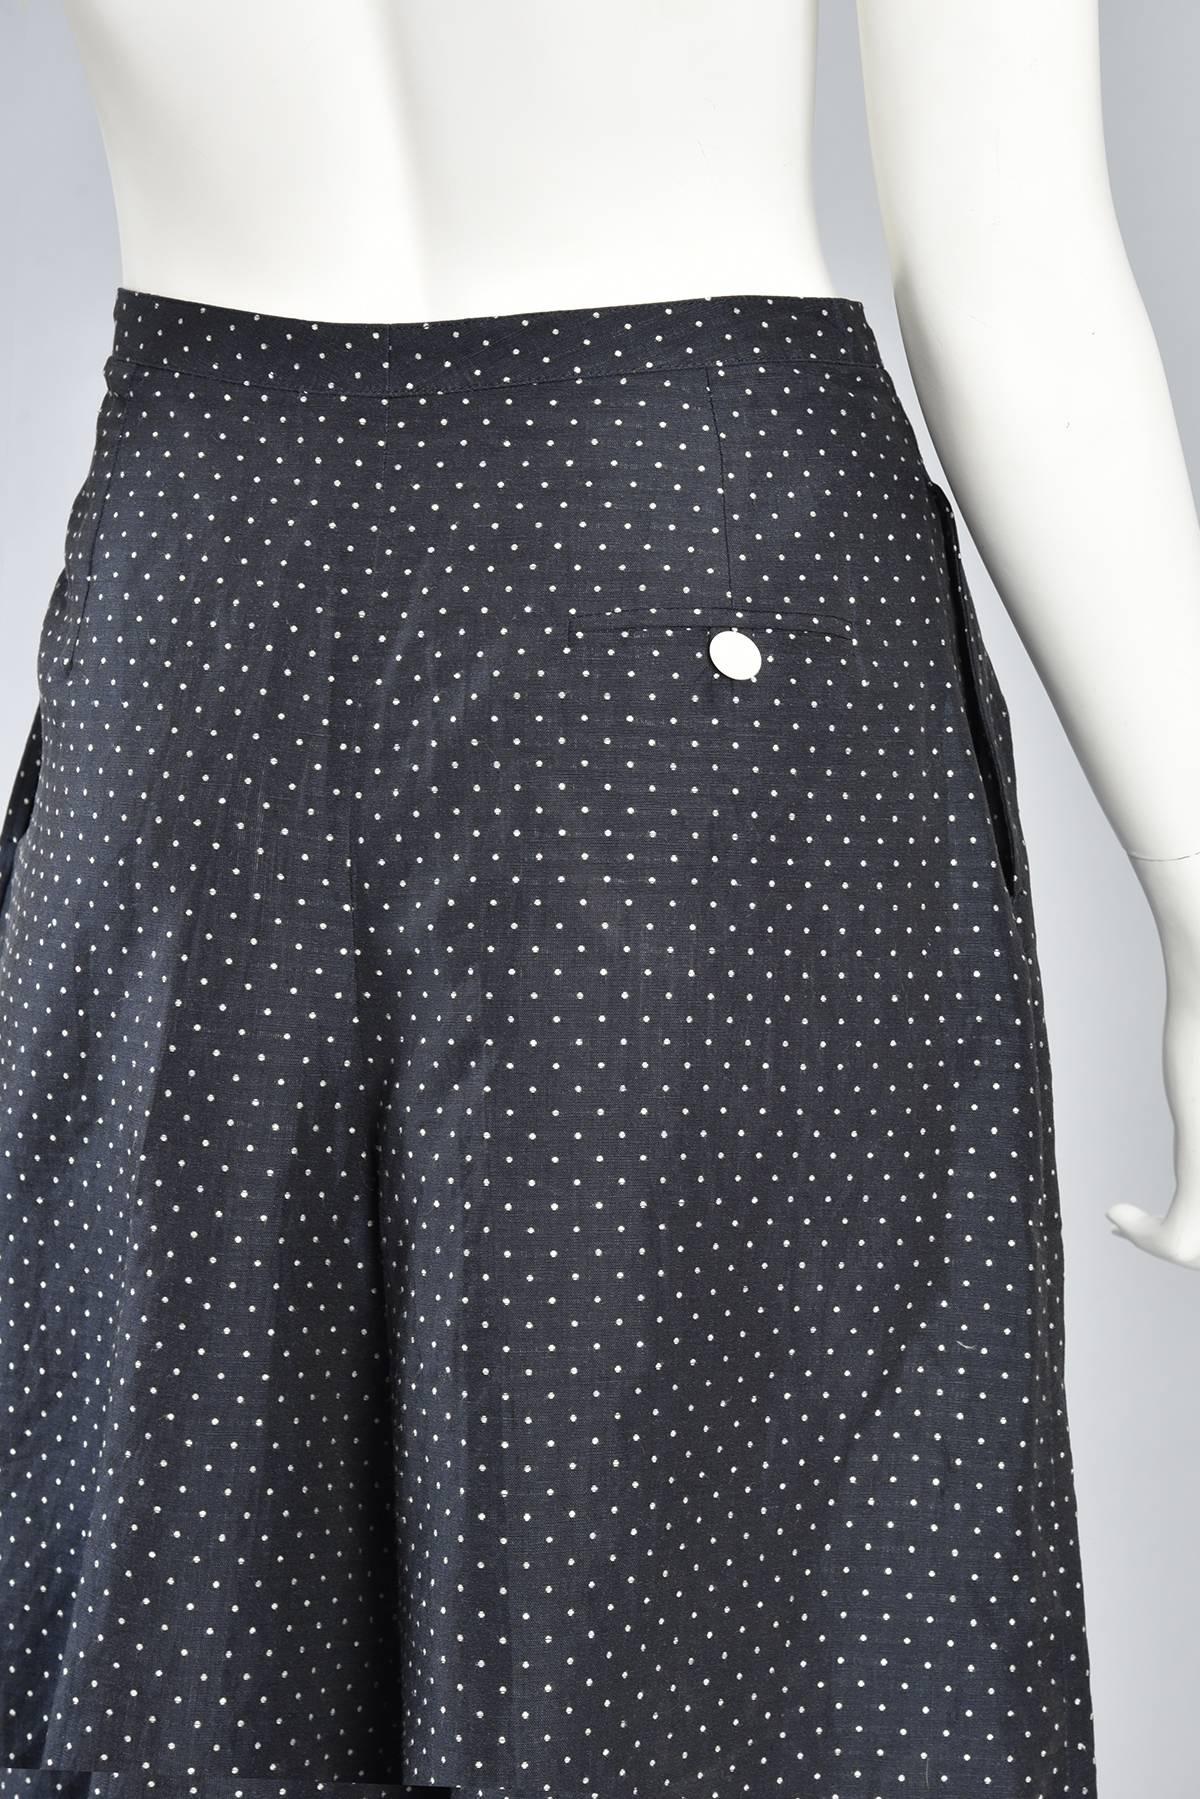 Navy Blue & White Flared Polkadot Culottes Shorts For Sale 2